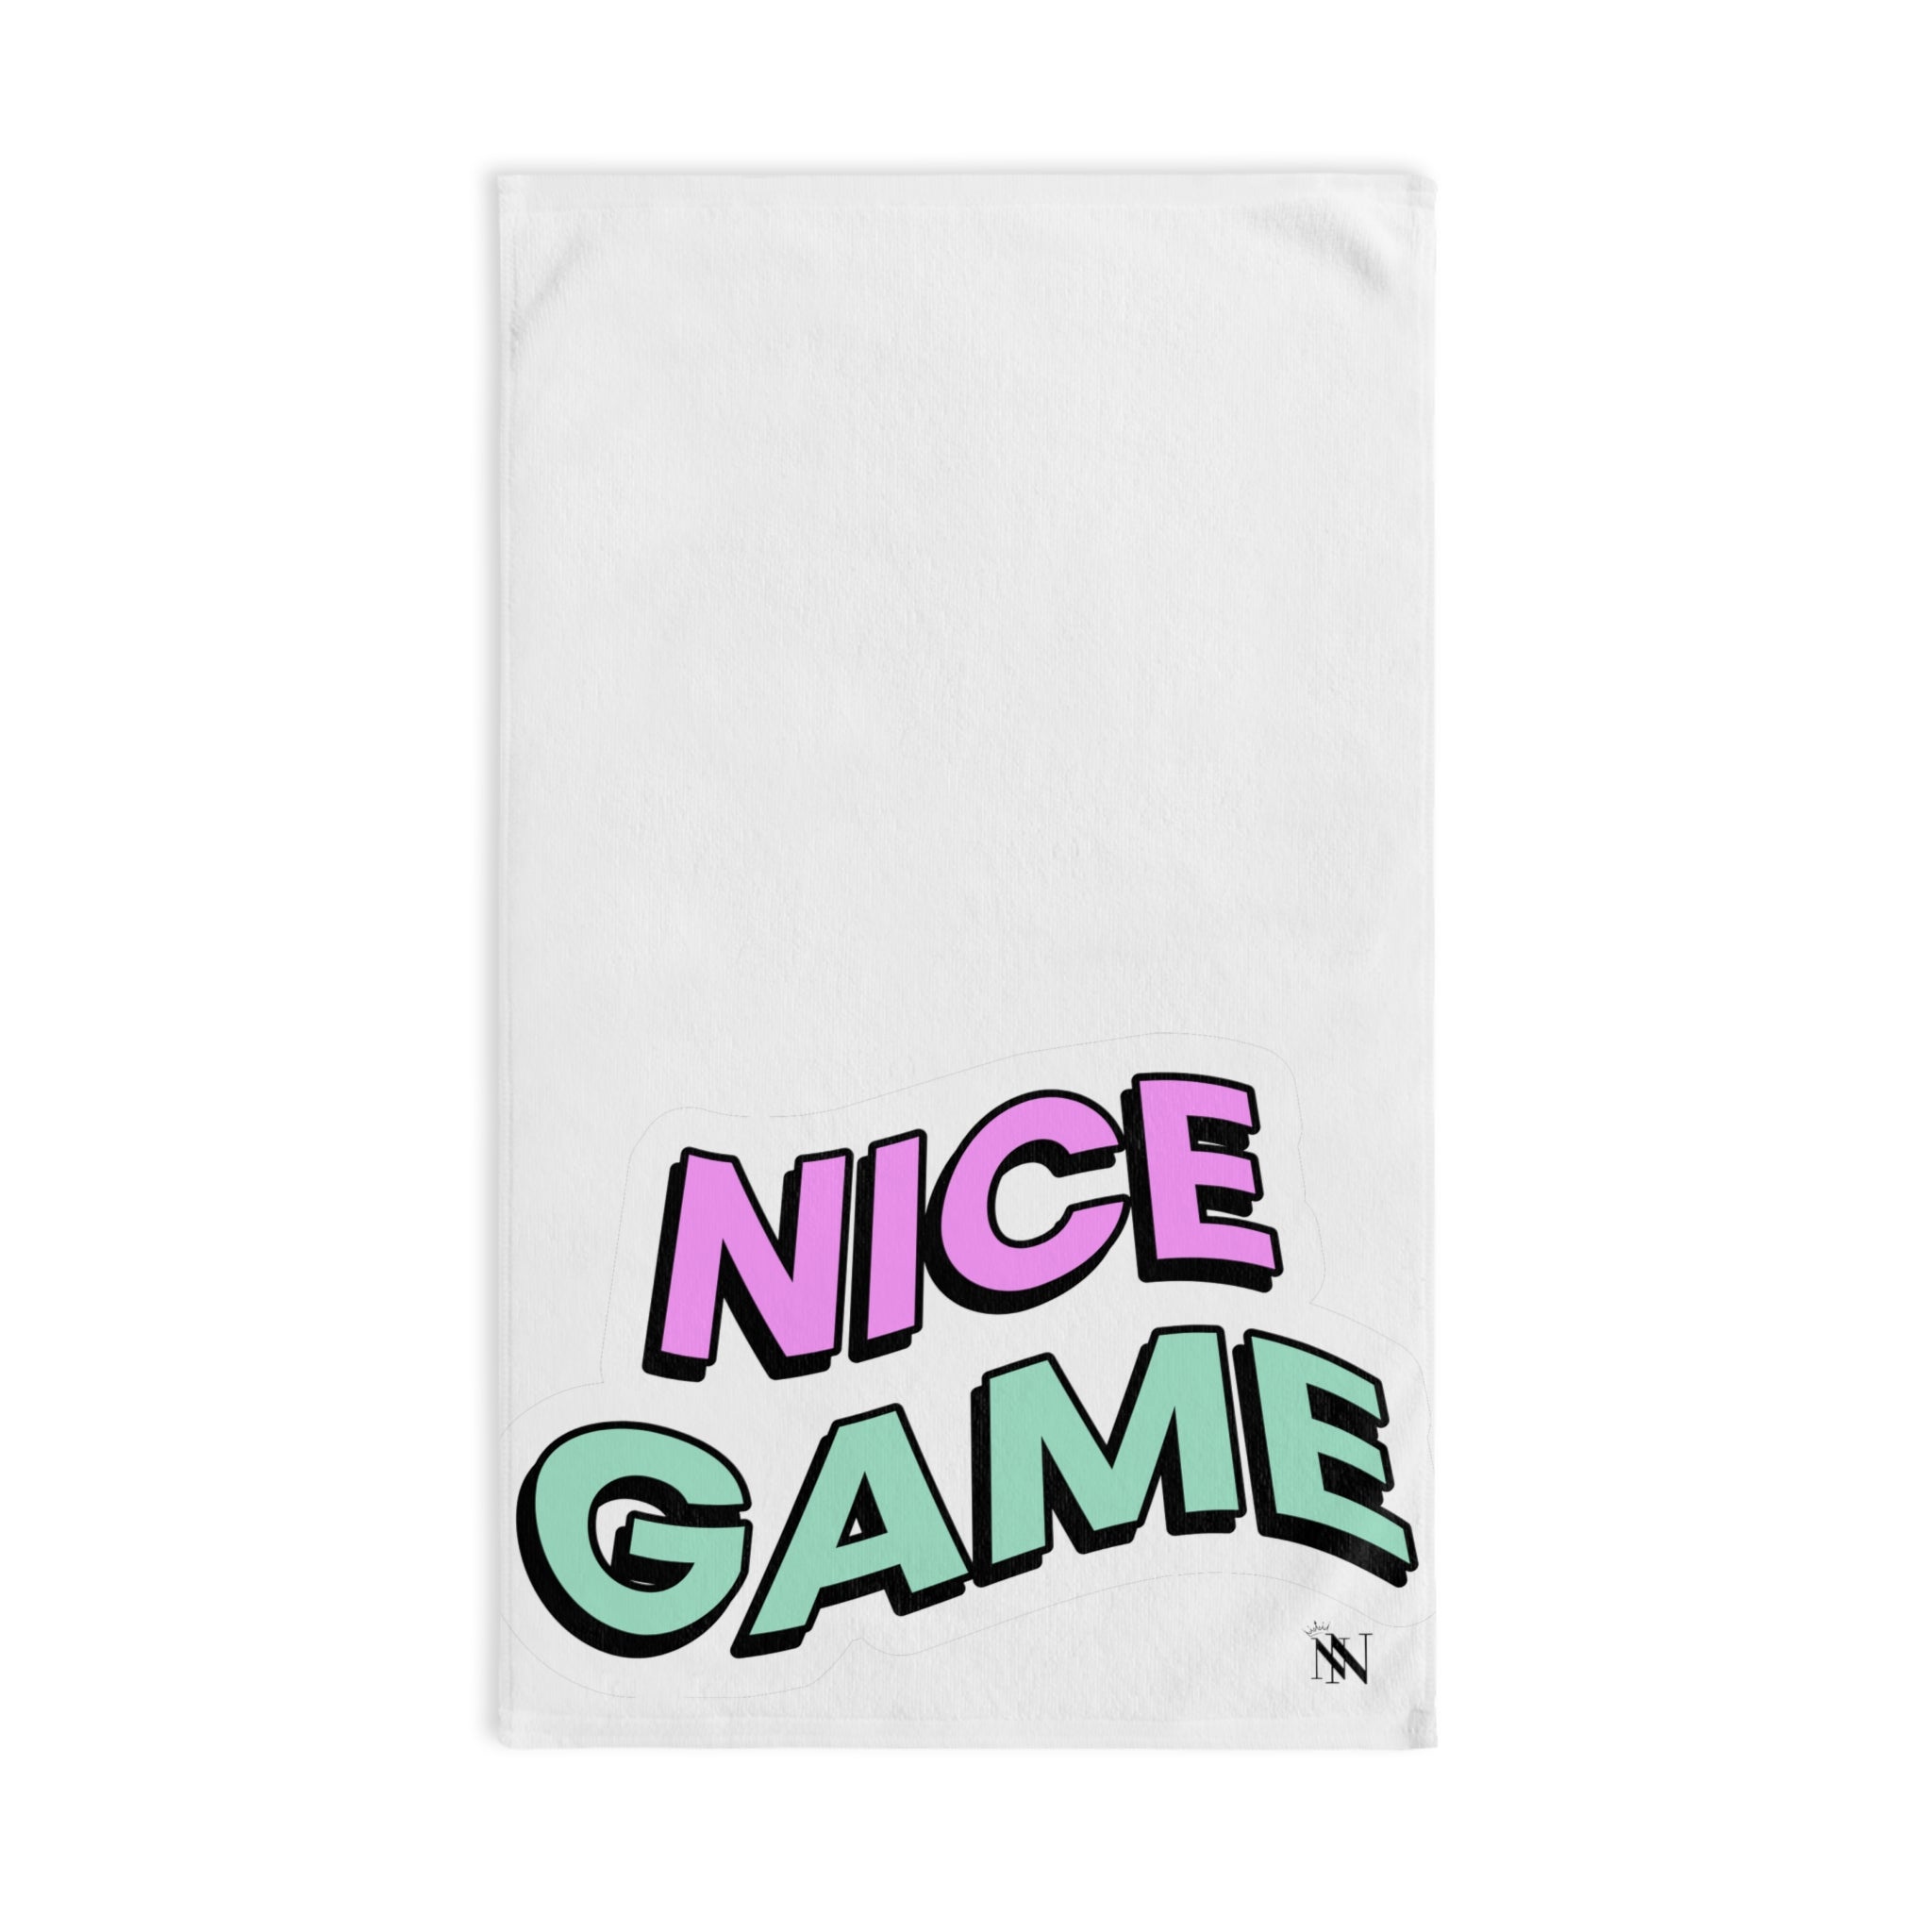 Nice Game White | Funny Gifts for Men - Gifts for Him - Birthday Gifts for Men, Him, Her, Husband, Boyfriend, Girlfriend, New Couple Gifts, Fathers & Valentines Day Gifts, Christmas Gifts NECTAR NAPKINS